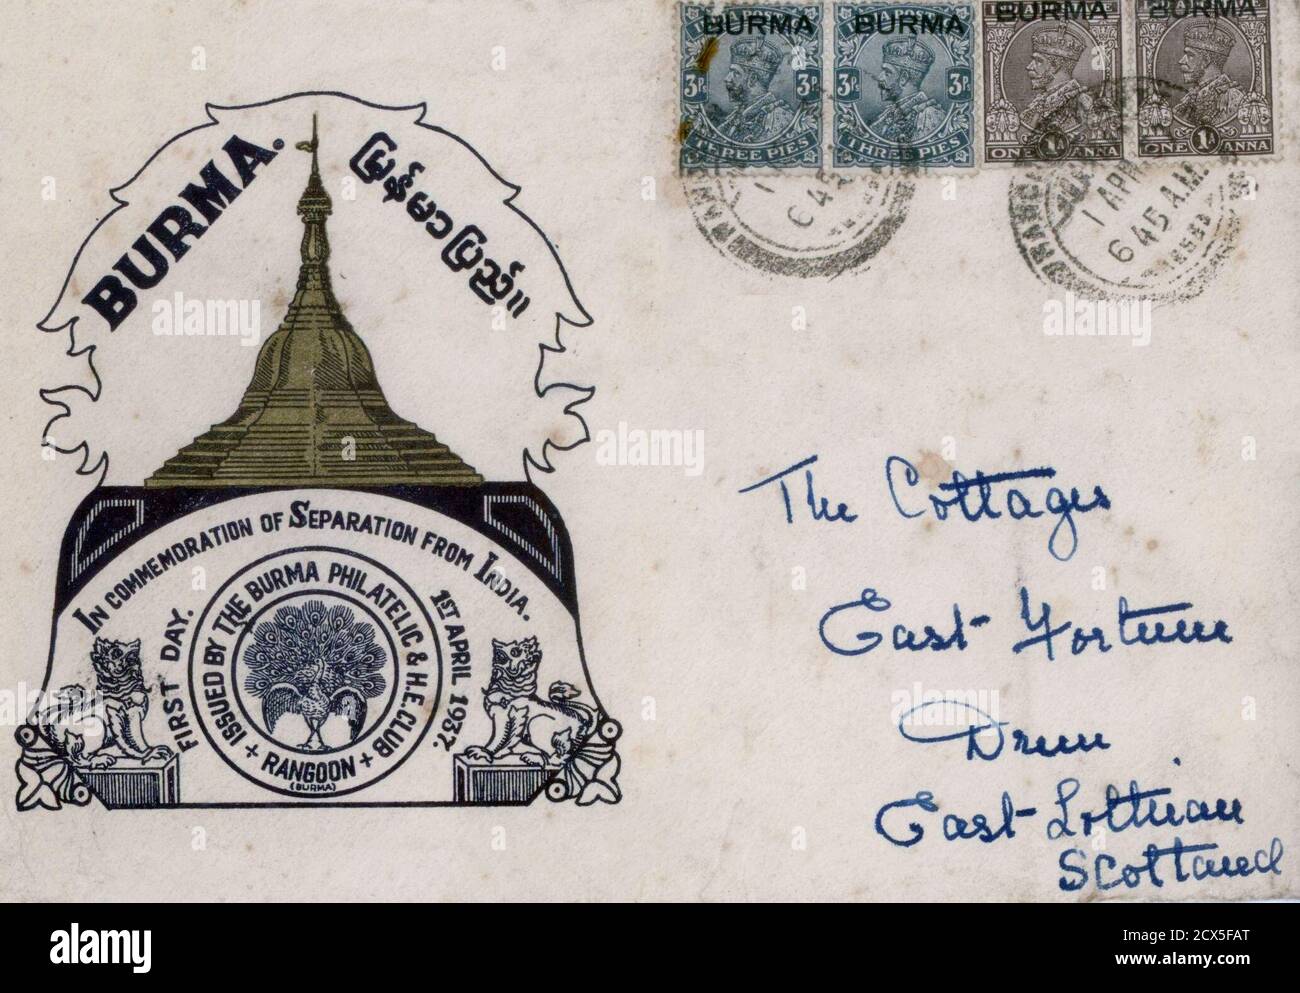 Original Caption: A first day cover issued on 1 April 1937 by the Government of British-ruled Burma to commemorate the separation of Burma from the British Indian Empire Stock Photo